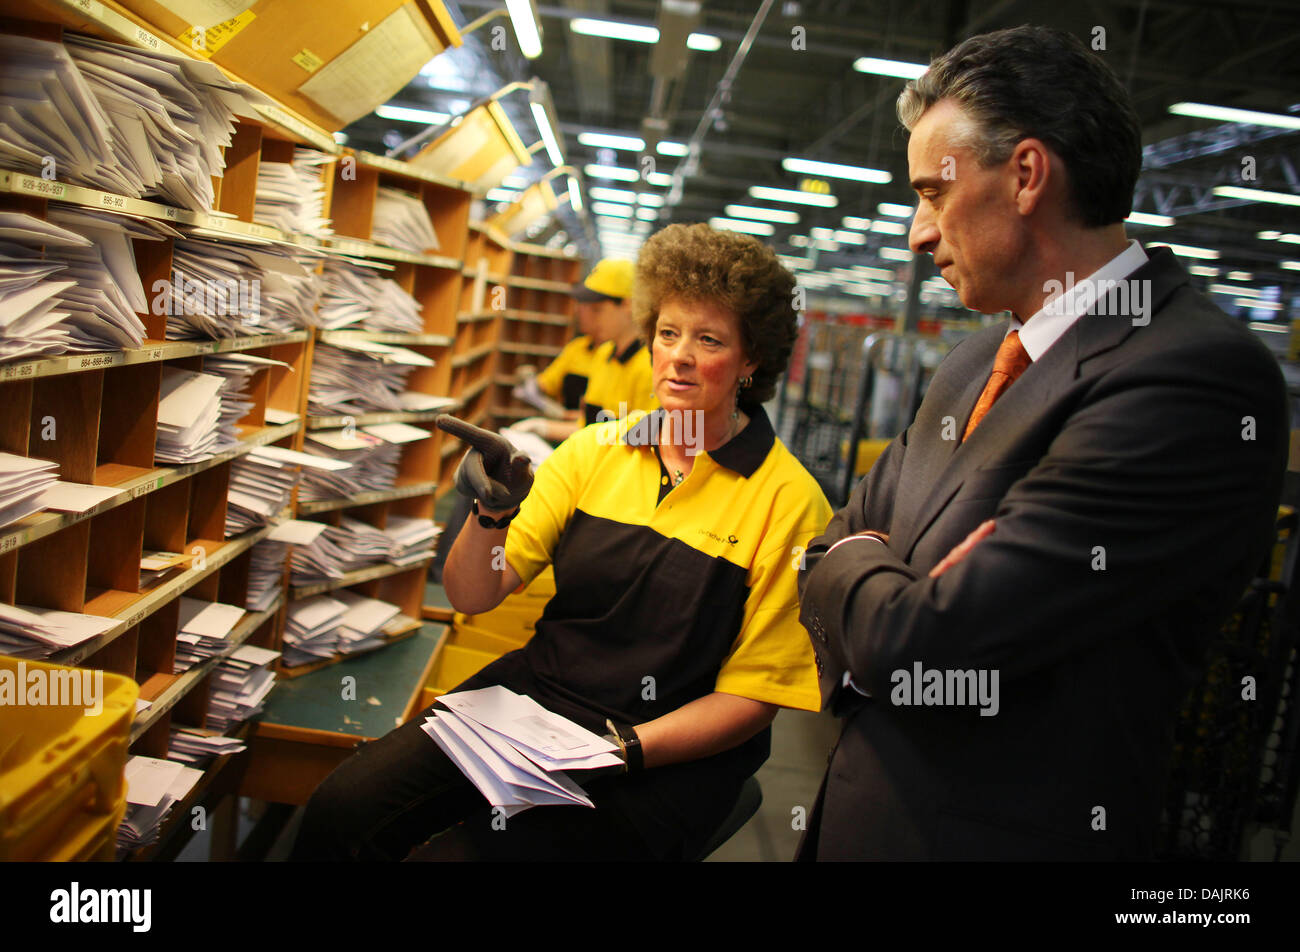 CEO of the Deutsche Post (German Mail) and the mail service DHL, Frank Appel (R), speaks to employees at a mail distribution centre in Troisdorf, Germany, 27 April 2011. Photo: Oliver Berg Stock Photo